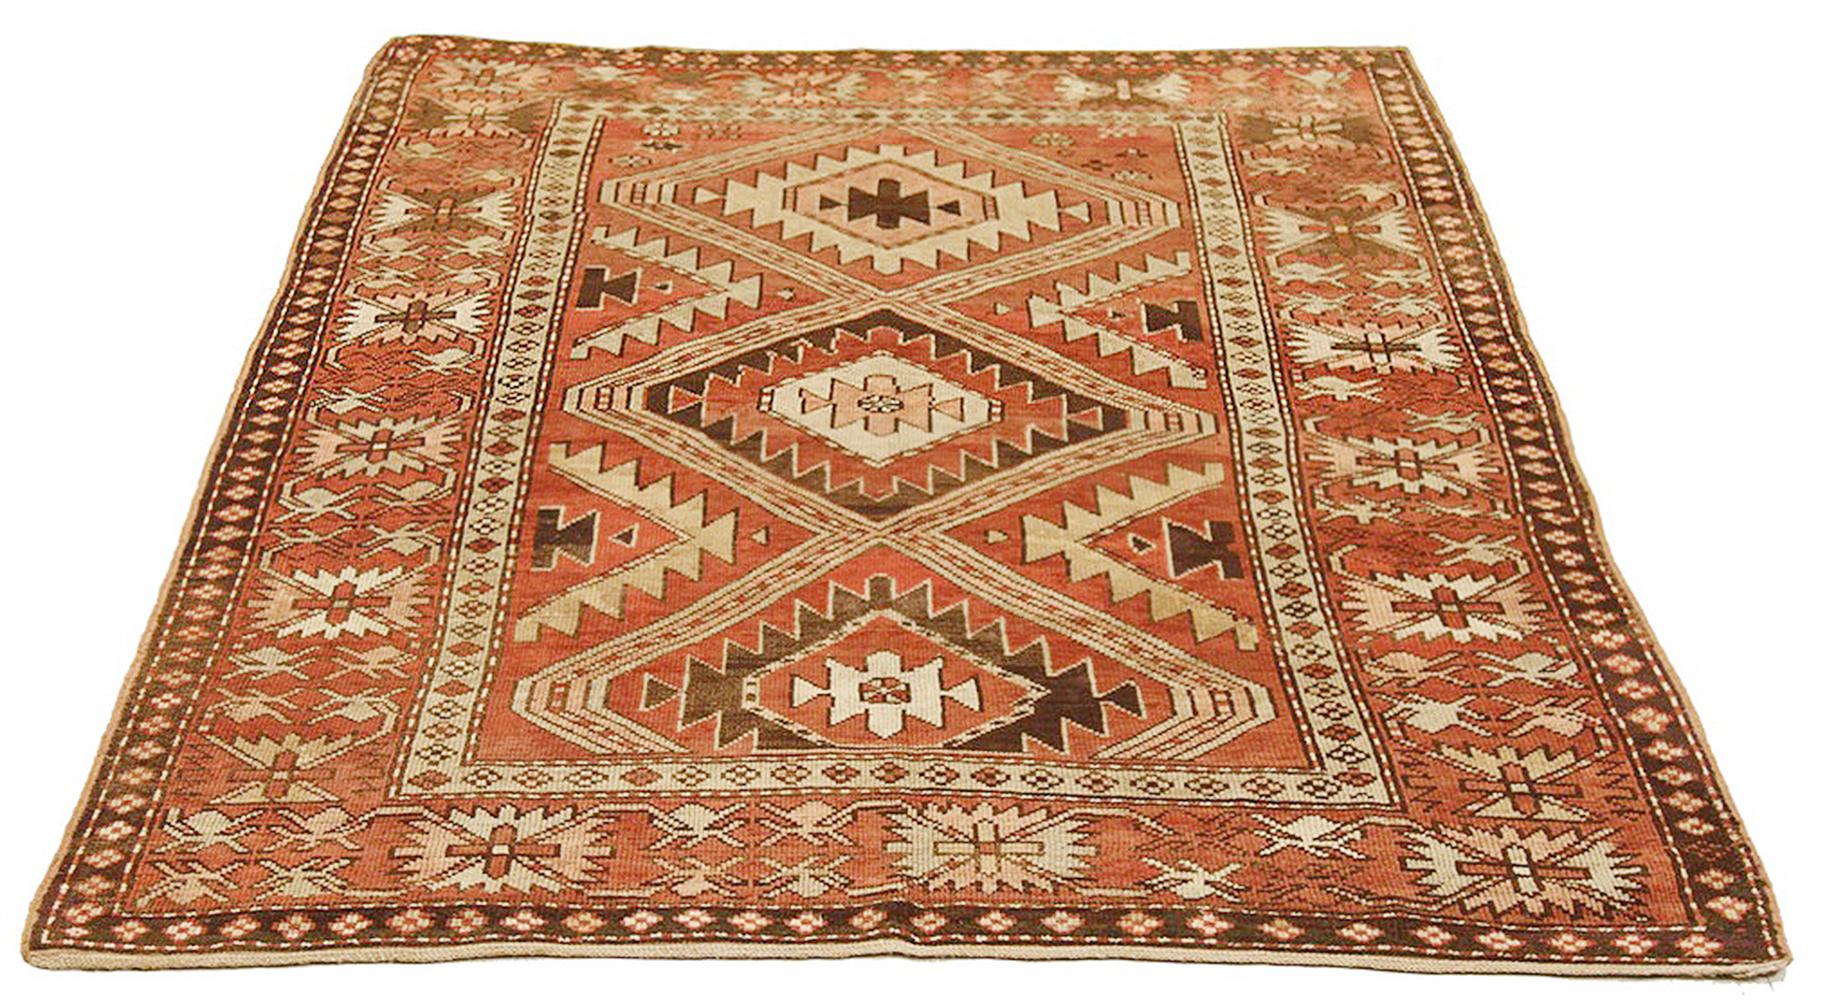 Antique Russian rug handwoven from the finest sheep’s wool and colored with all-natural vegetable dyes that are safe for humans and pets. It’s a traditional Kazak design featuring geometric medallion details in beige and brown over a beige field.